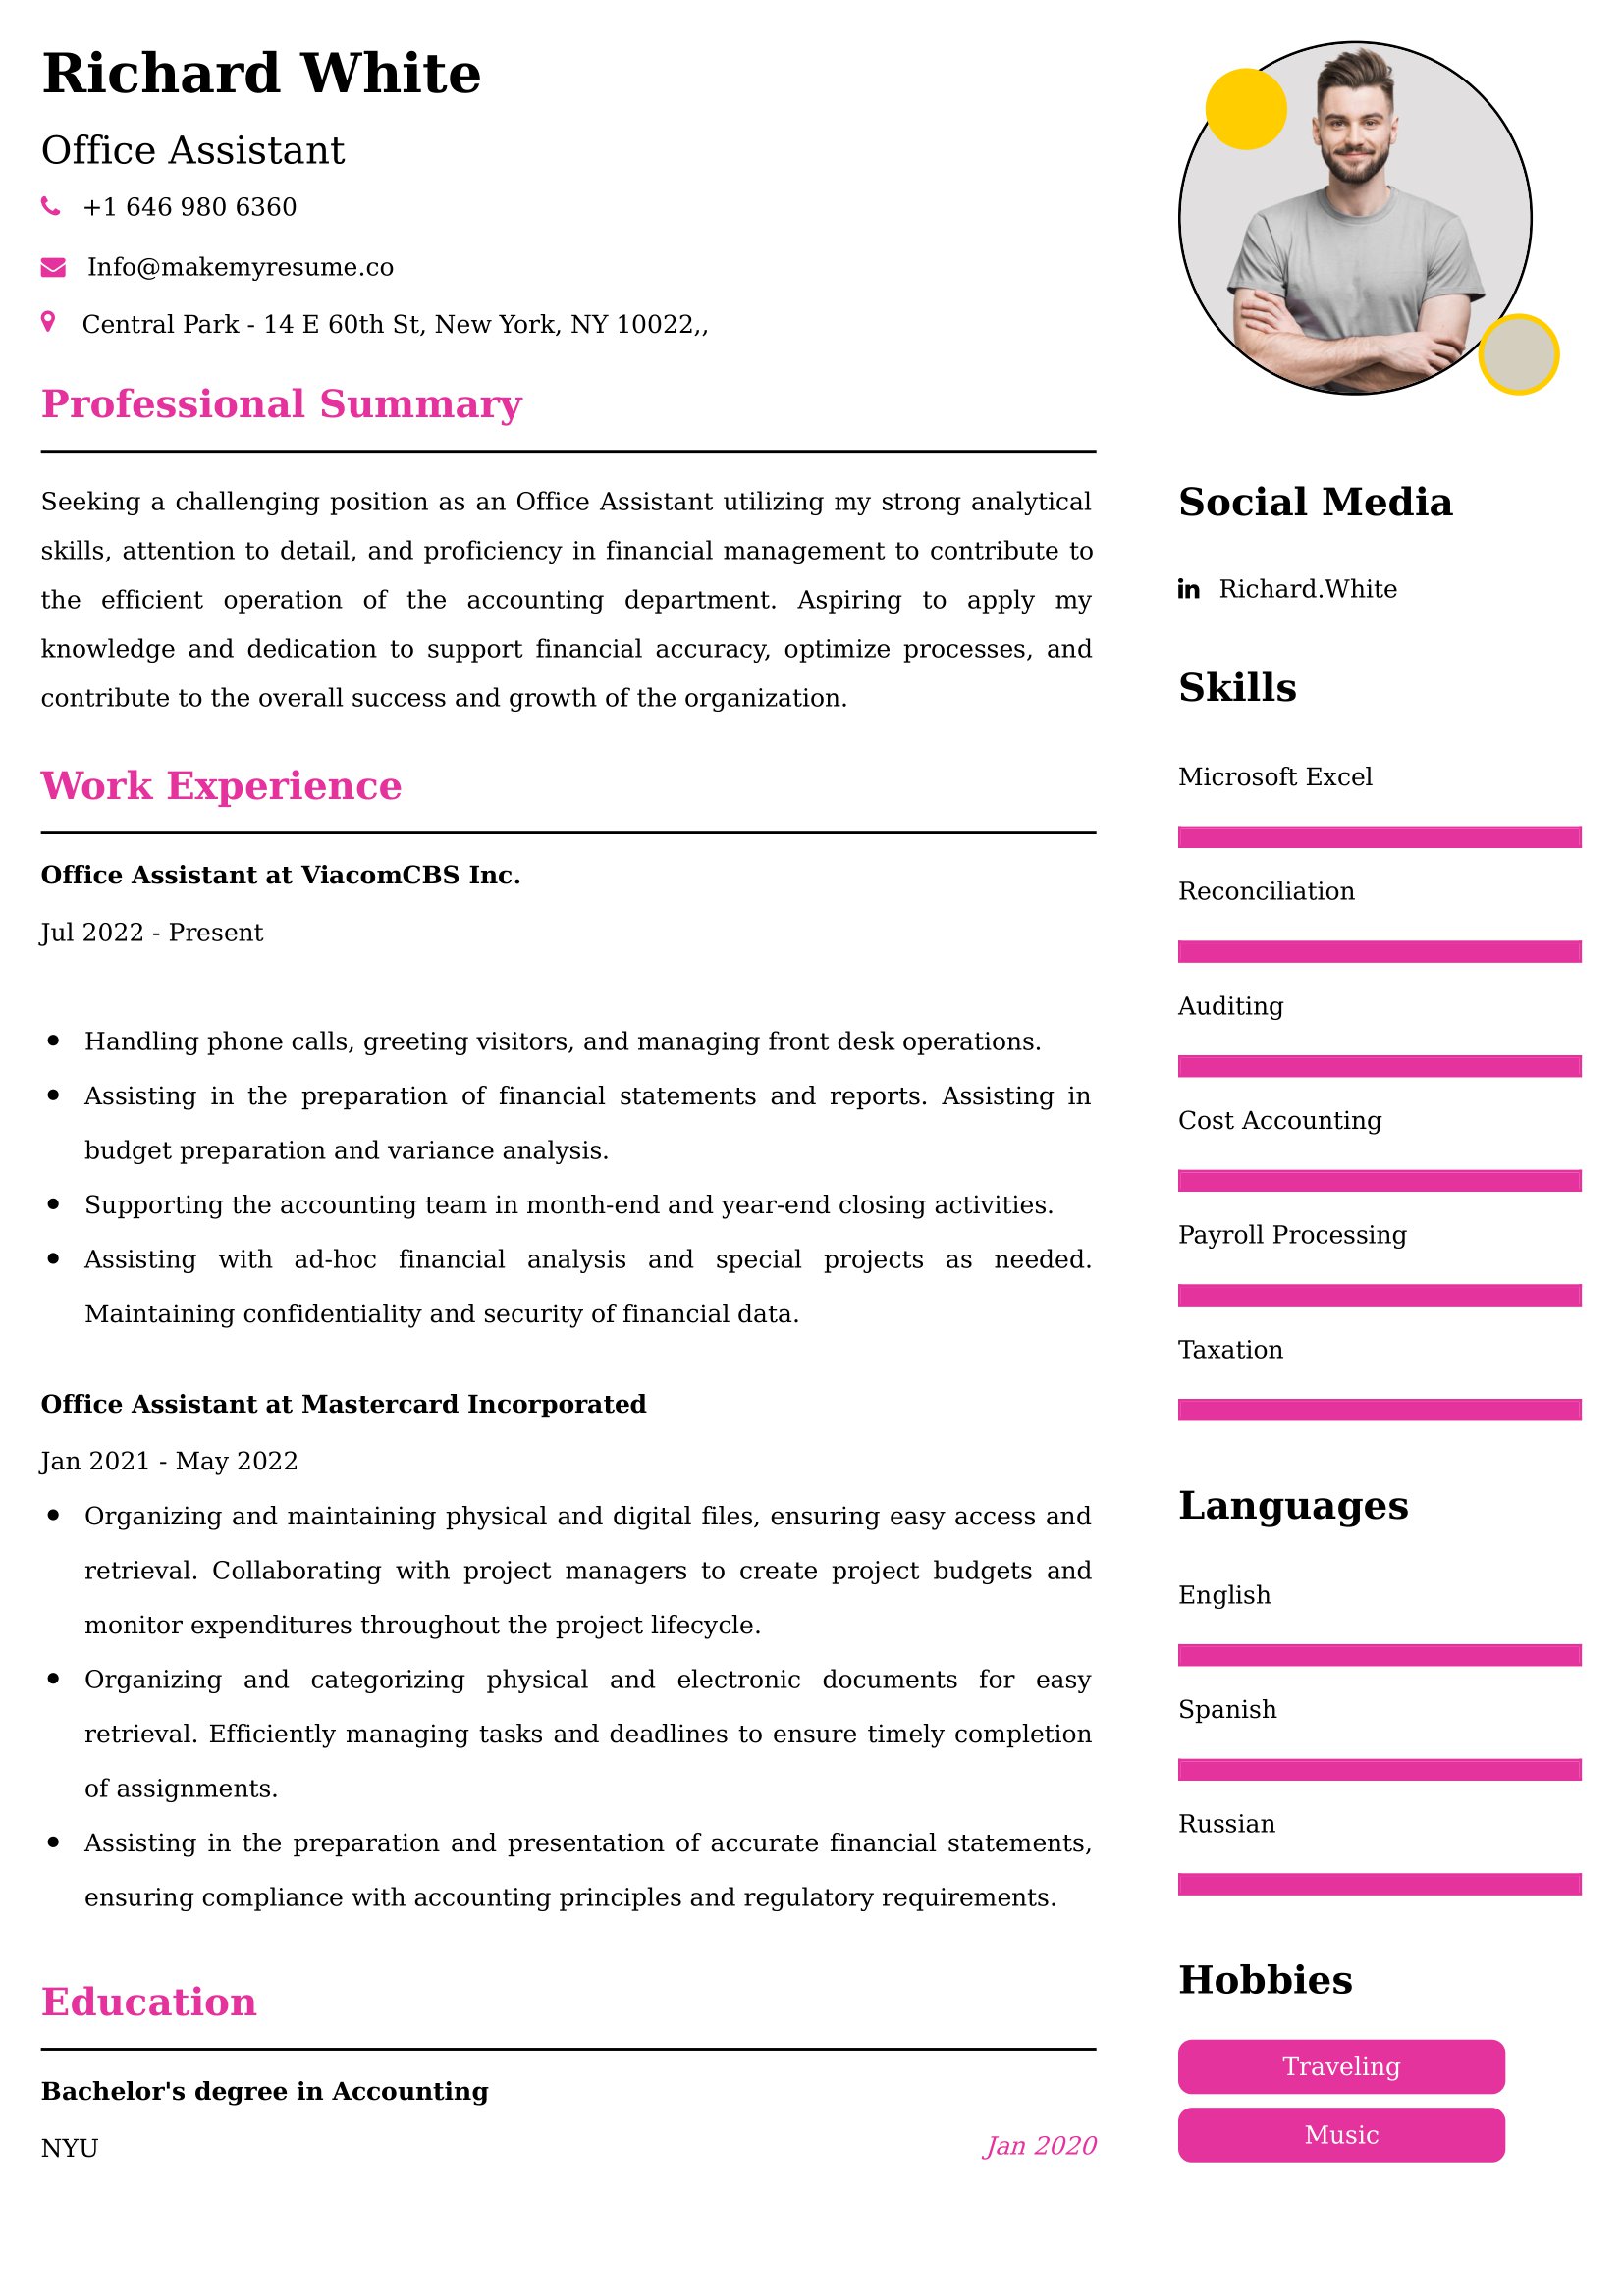 Office Assistant Resume Examples - Brazilian Format, Latest Template